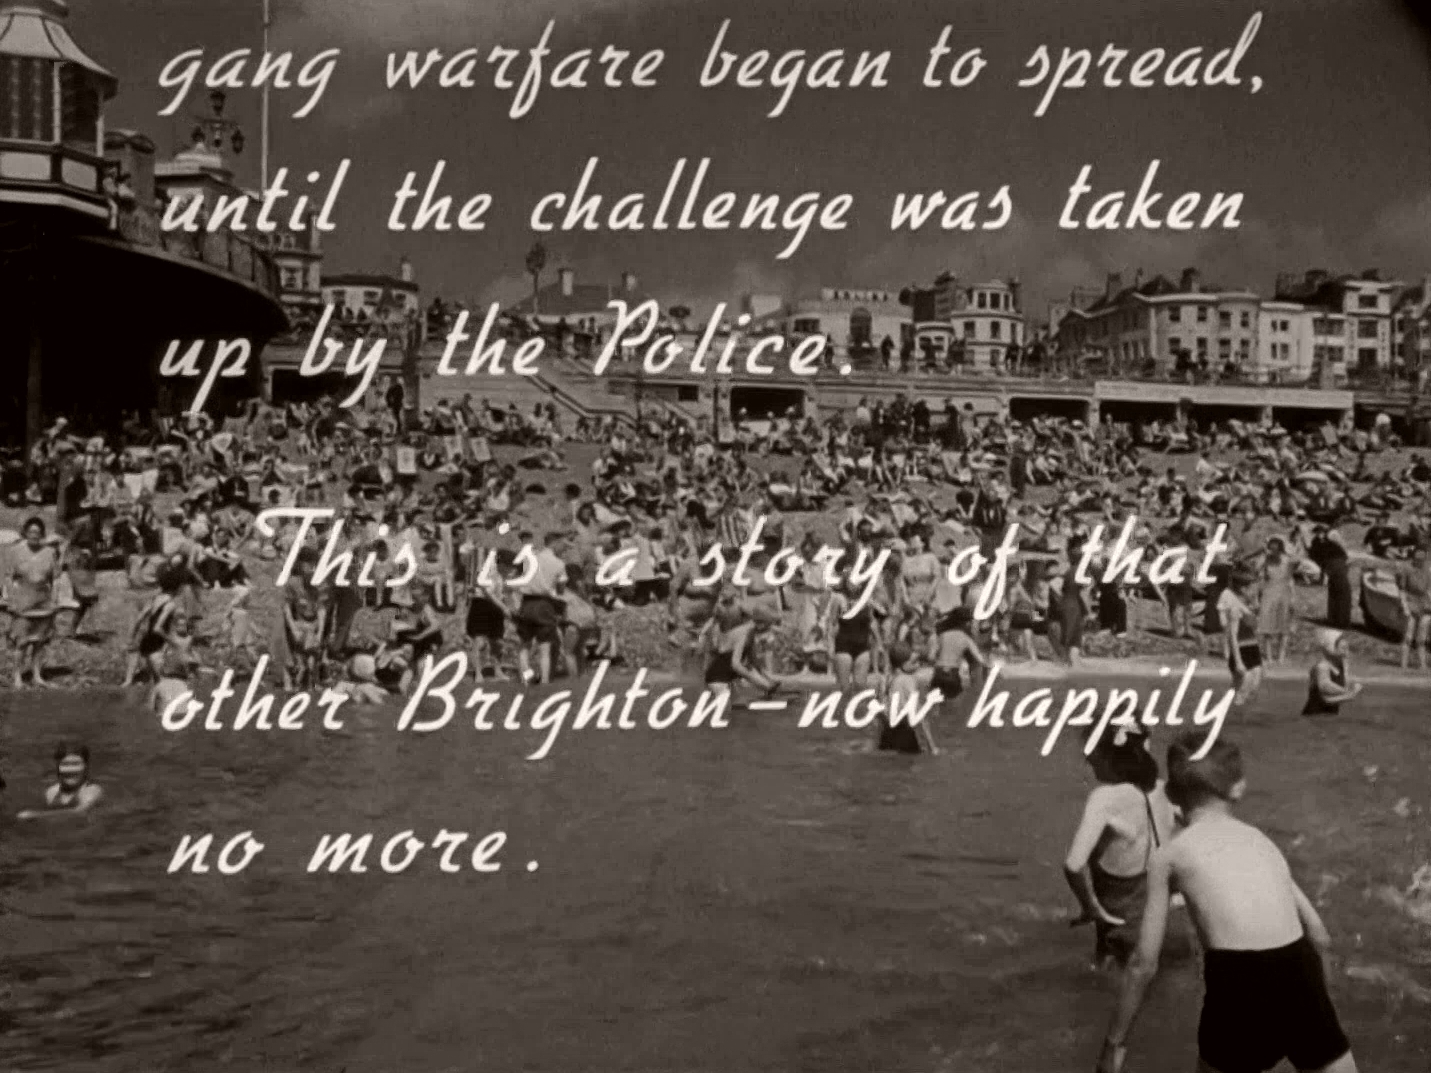 Main title from Brighton Rock (1948) (17). …up by the Police.  This is a story of that other Brighton – now happily now more.